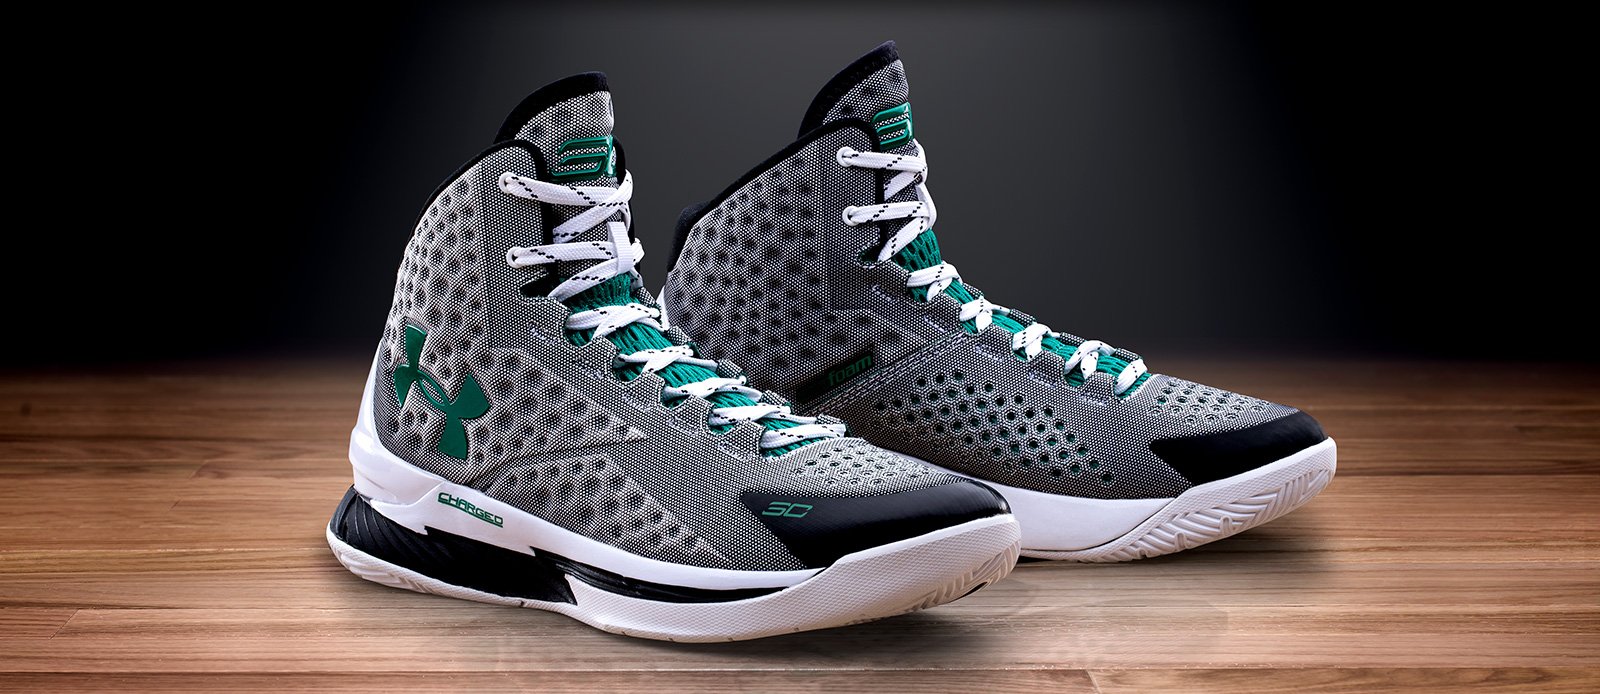 Under Armour Curry One 'Golf' Pack 